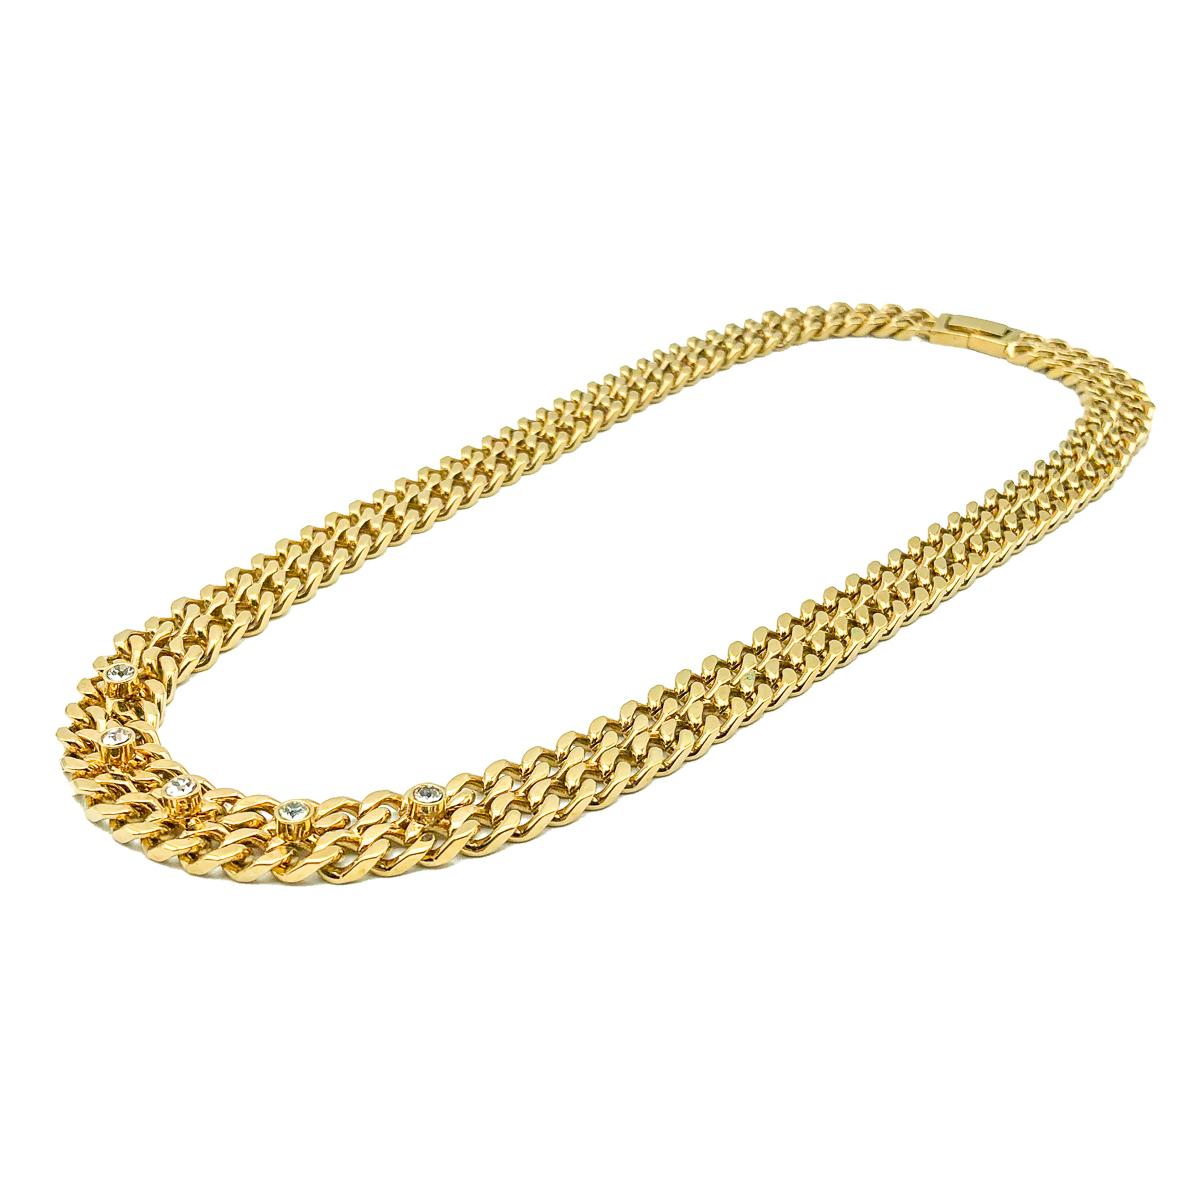 A Vintage Crystal Chain Necklace. Featuring a gold plated double flattened curb chain with bezel set crystal accents. In very good vintage condition, approx. 44.5cm. A stunning capsule necklace that will work with everything and always look